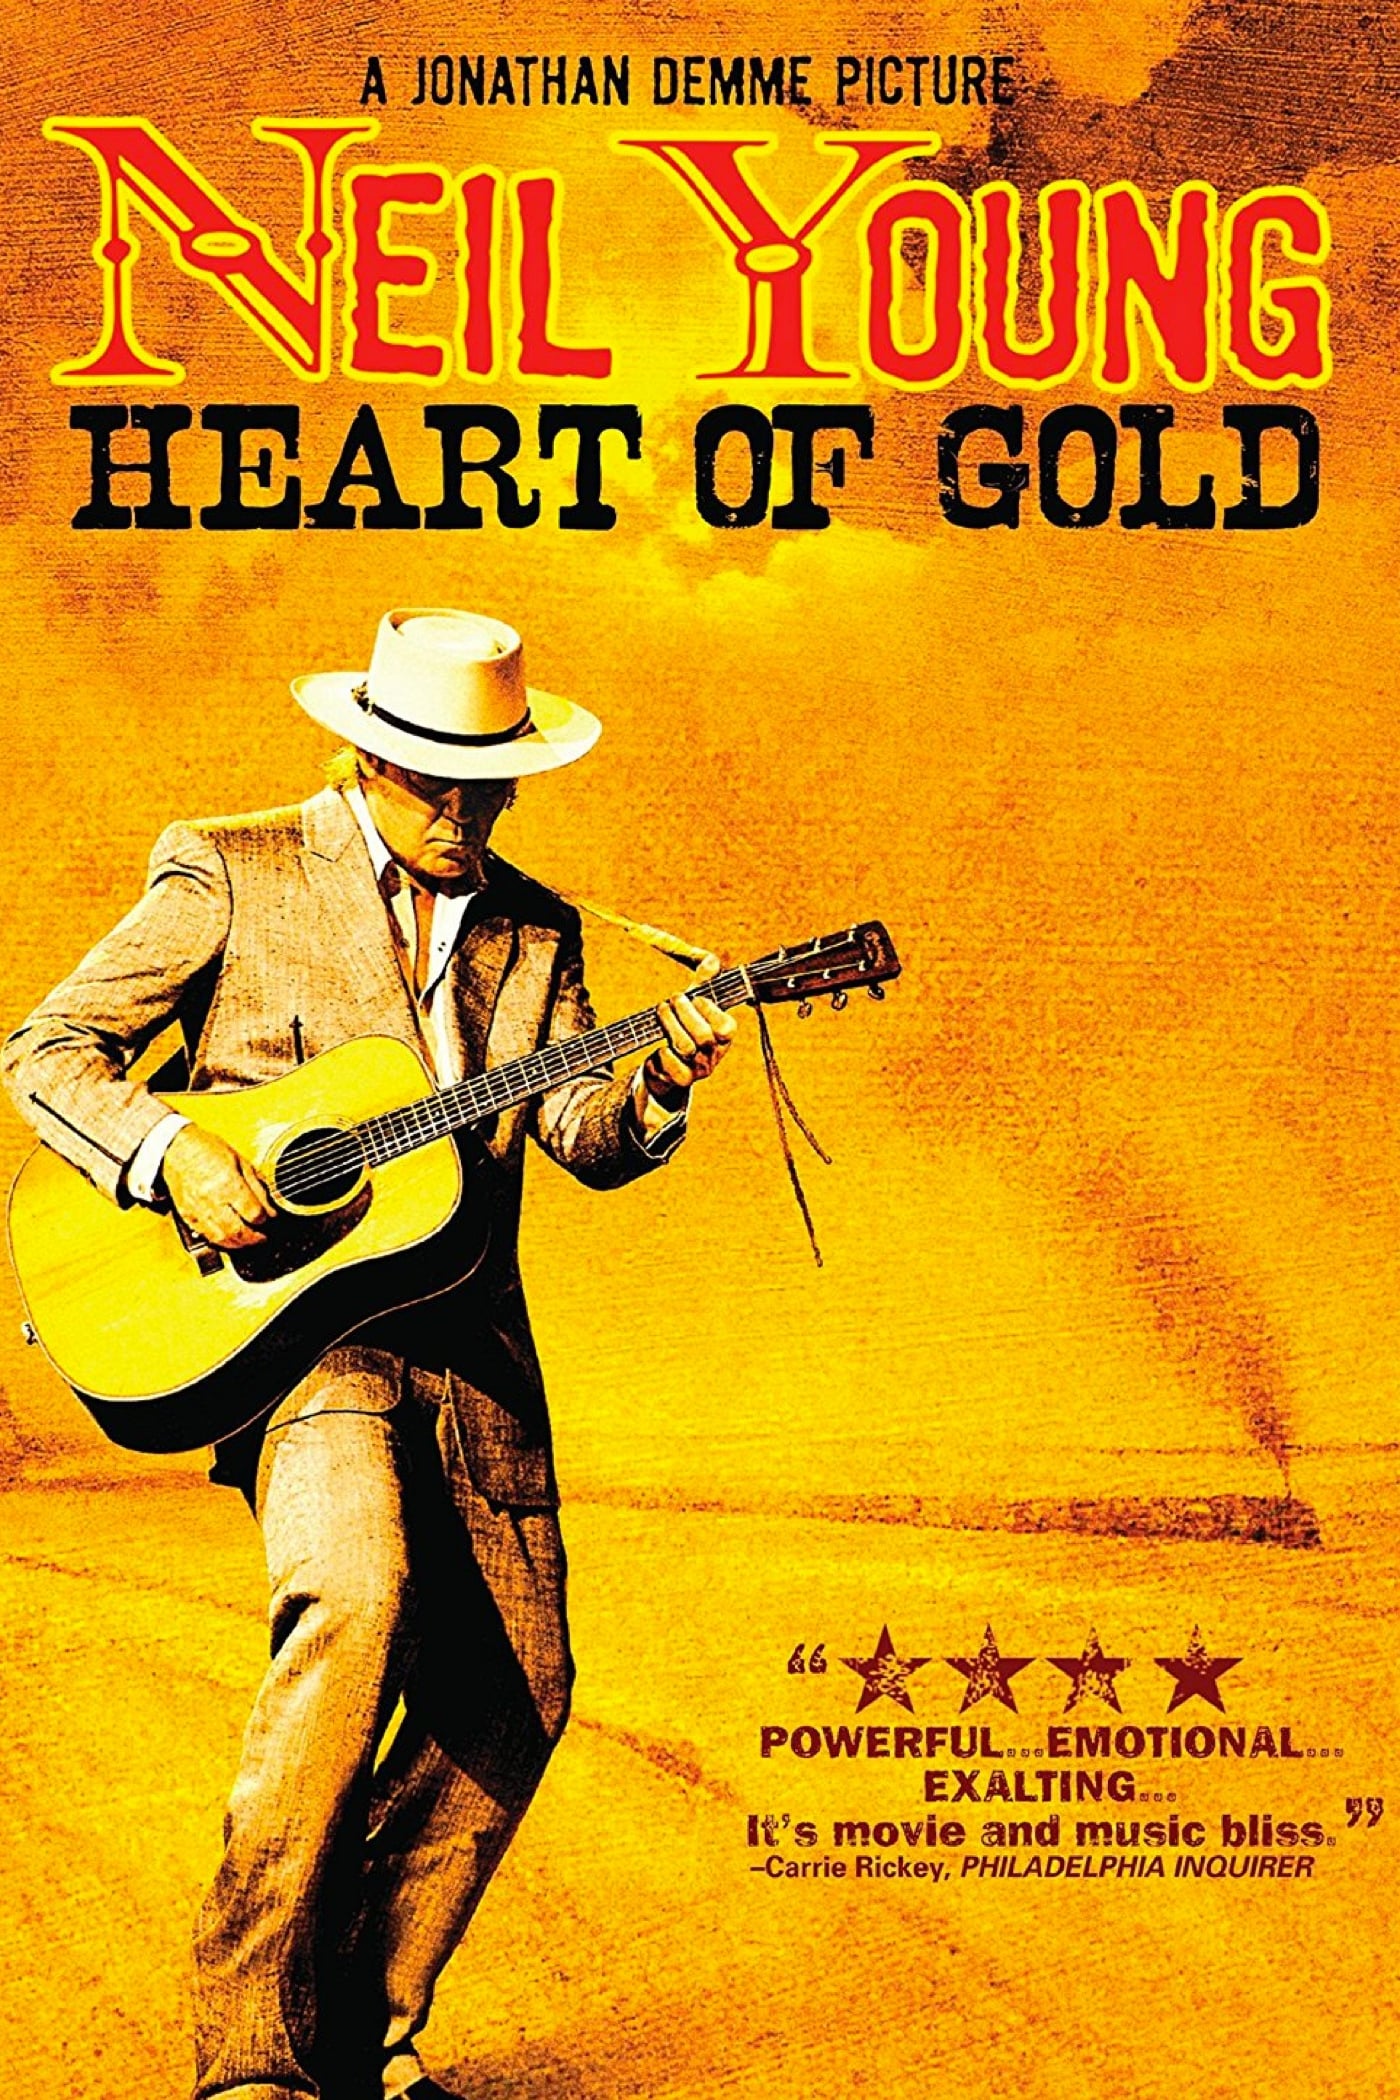 Neil Young: Heart of Gold wiki, synopsis, reviews - Movies Rankings!